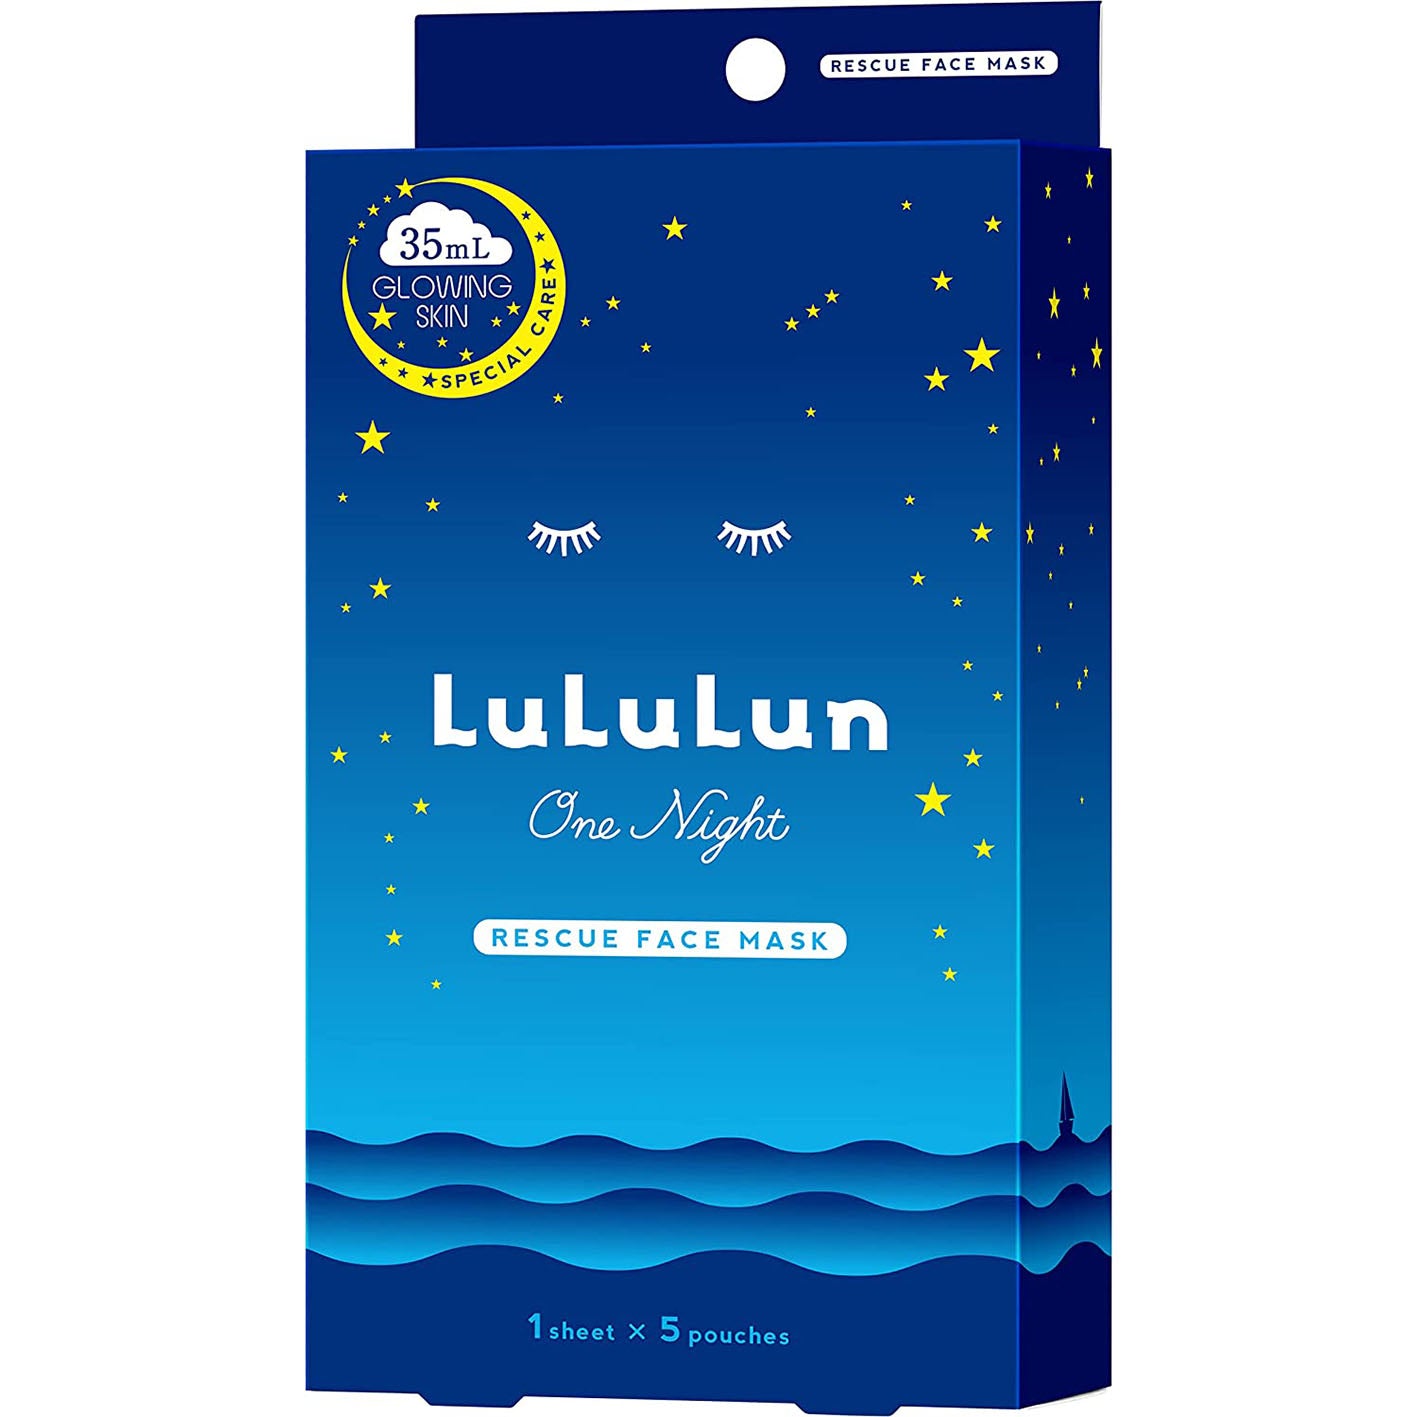 Lululun One Night Rescue Clarity Face Mask 5psc - Harajuku Culture Japan - Japanease Products Store Beauty and Stationery